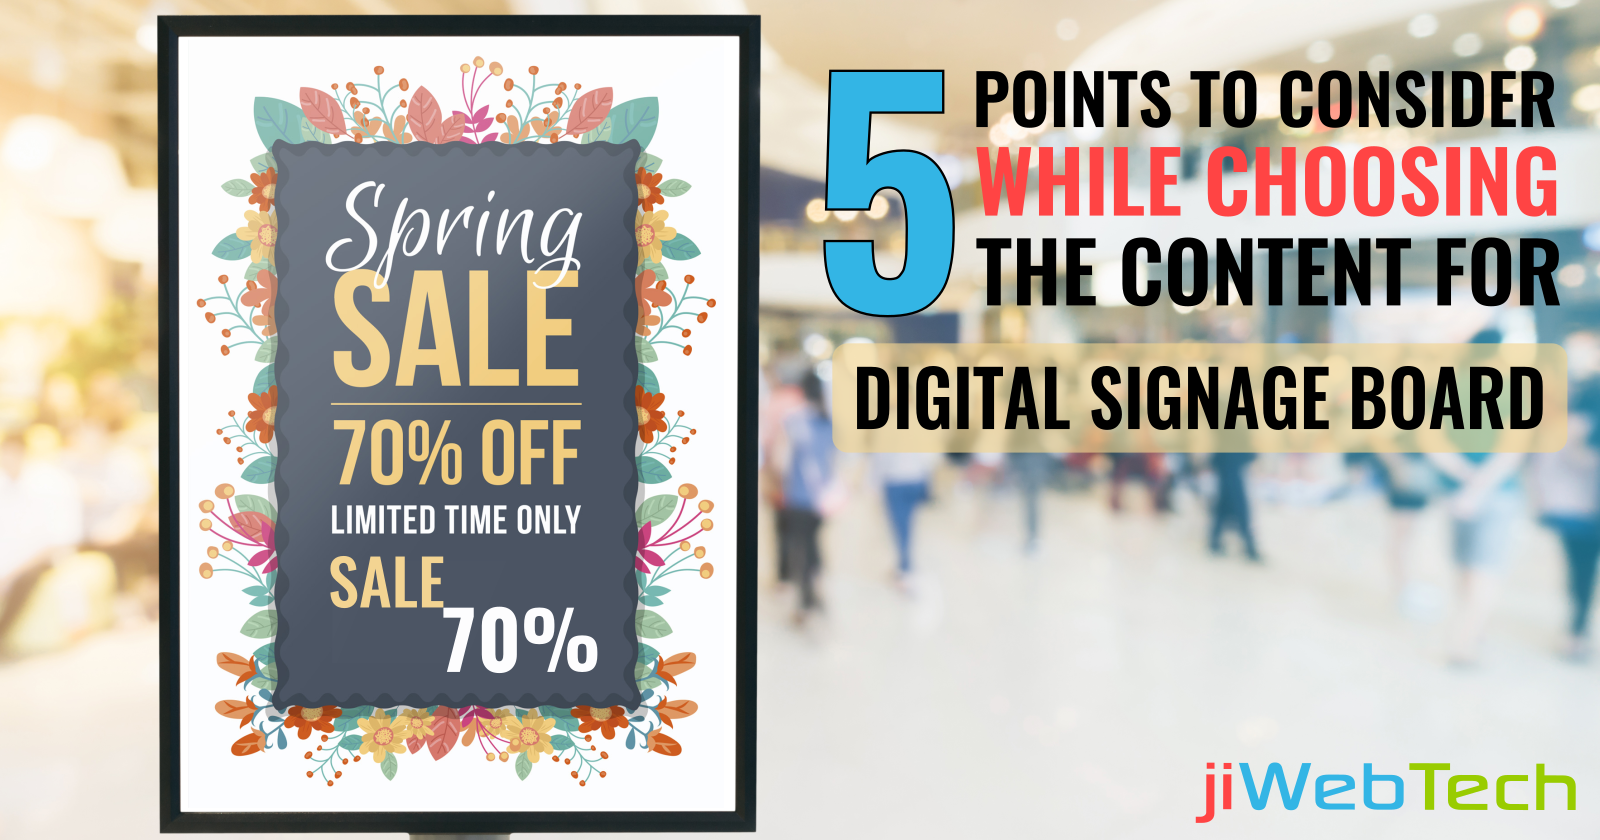 5 Points To Consider While Choosing The Content For Digital Signage Board